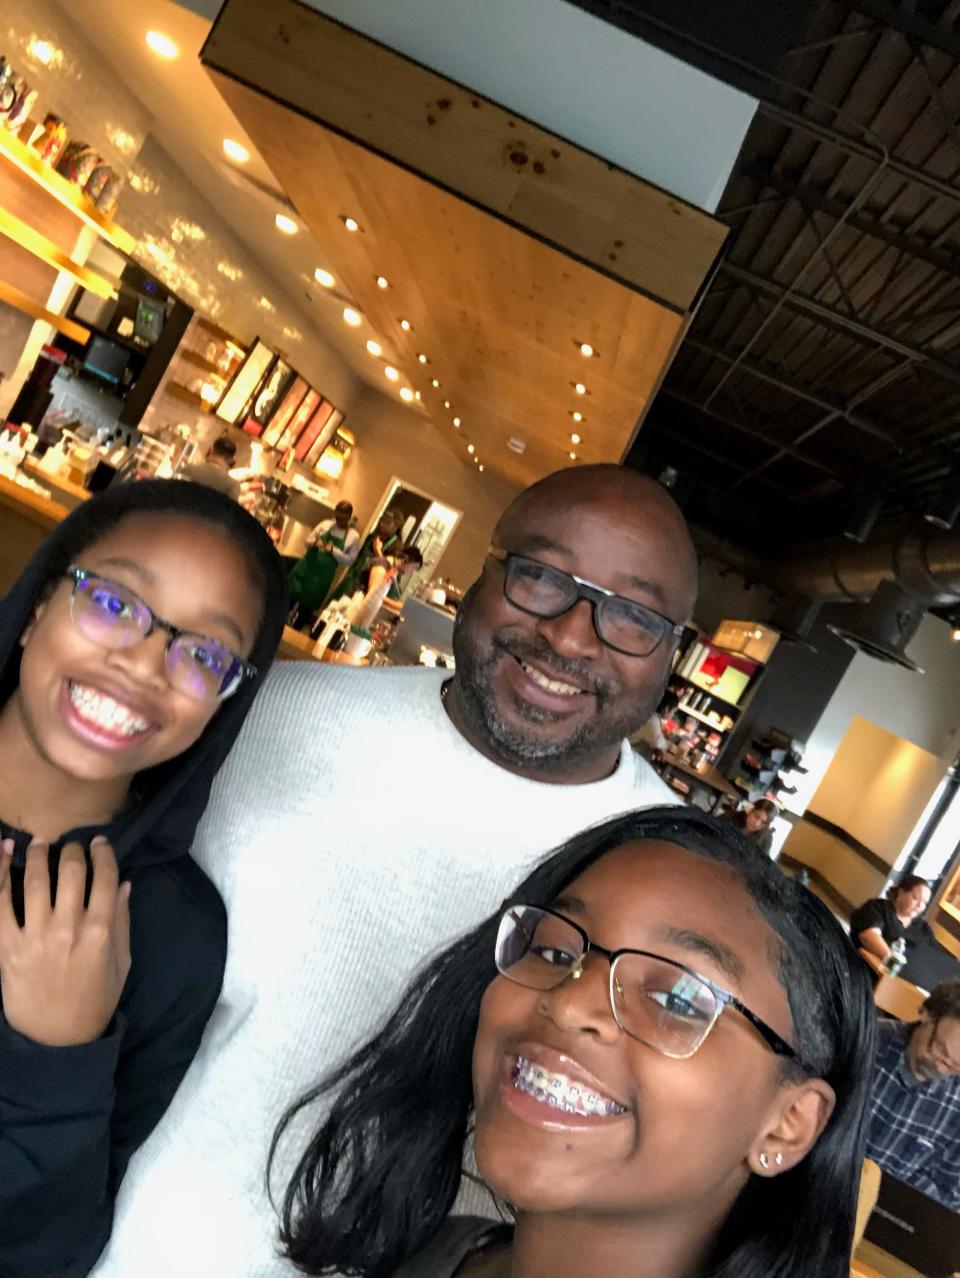 FAMU Faculty Union President Roscoe Hightower and his two daughters, 18-year-old Jane and 20-year-old Asia.